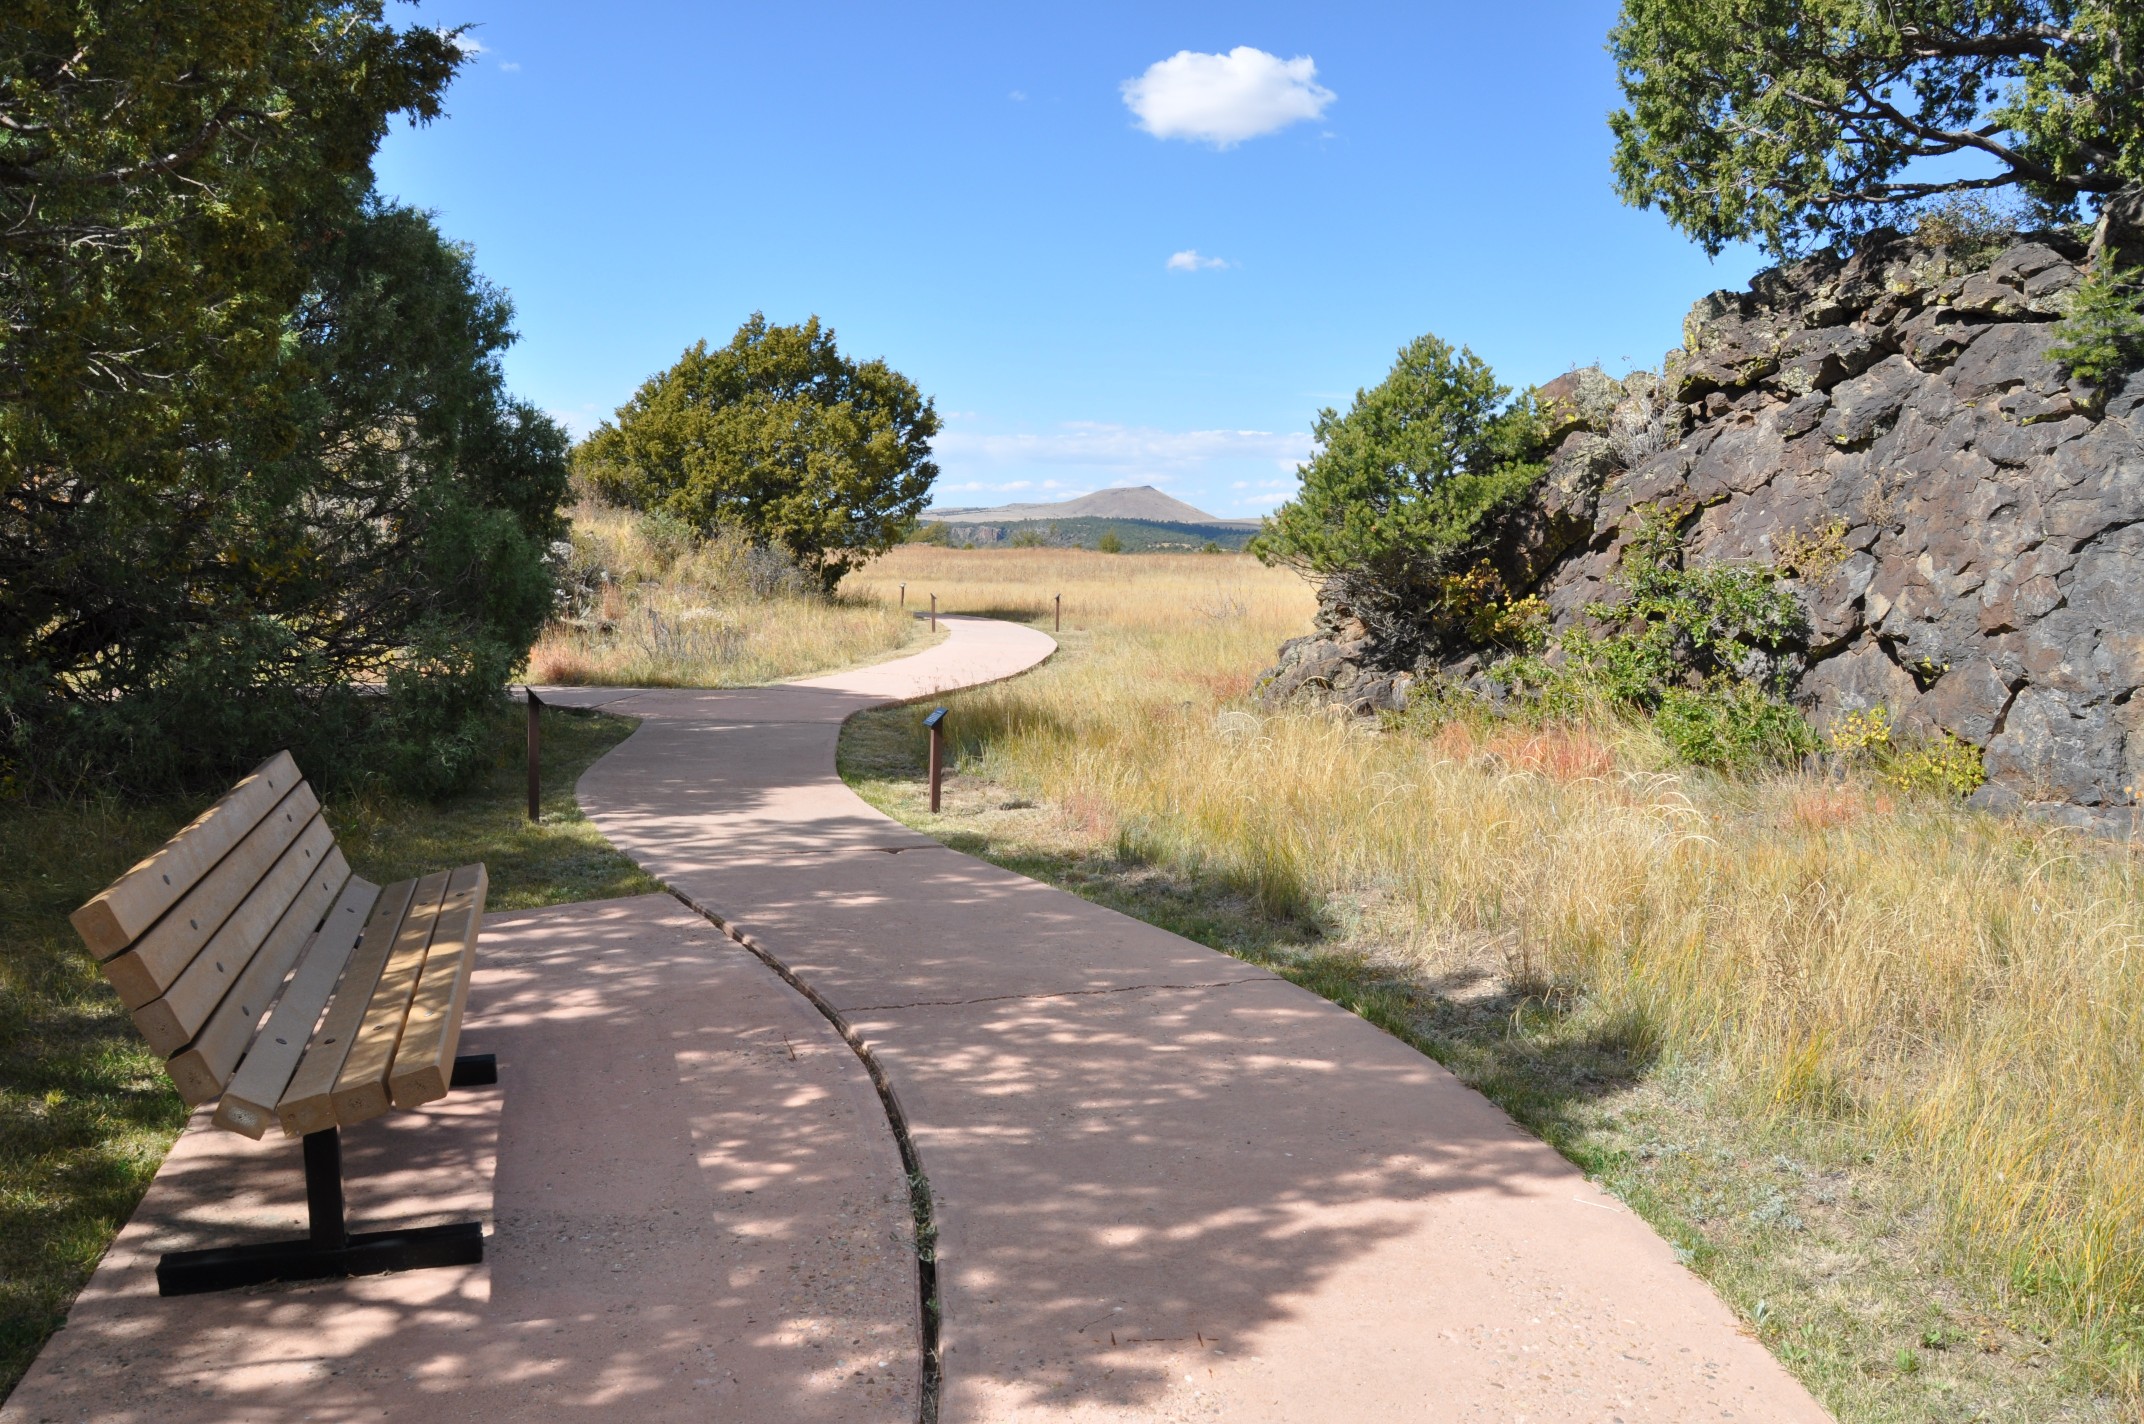 A shaded bench on the side of a paved nature trail wending through juniper trees and grasses.